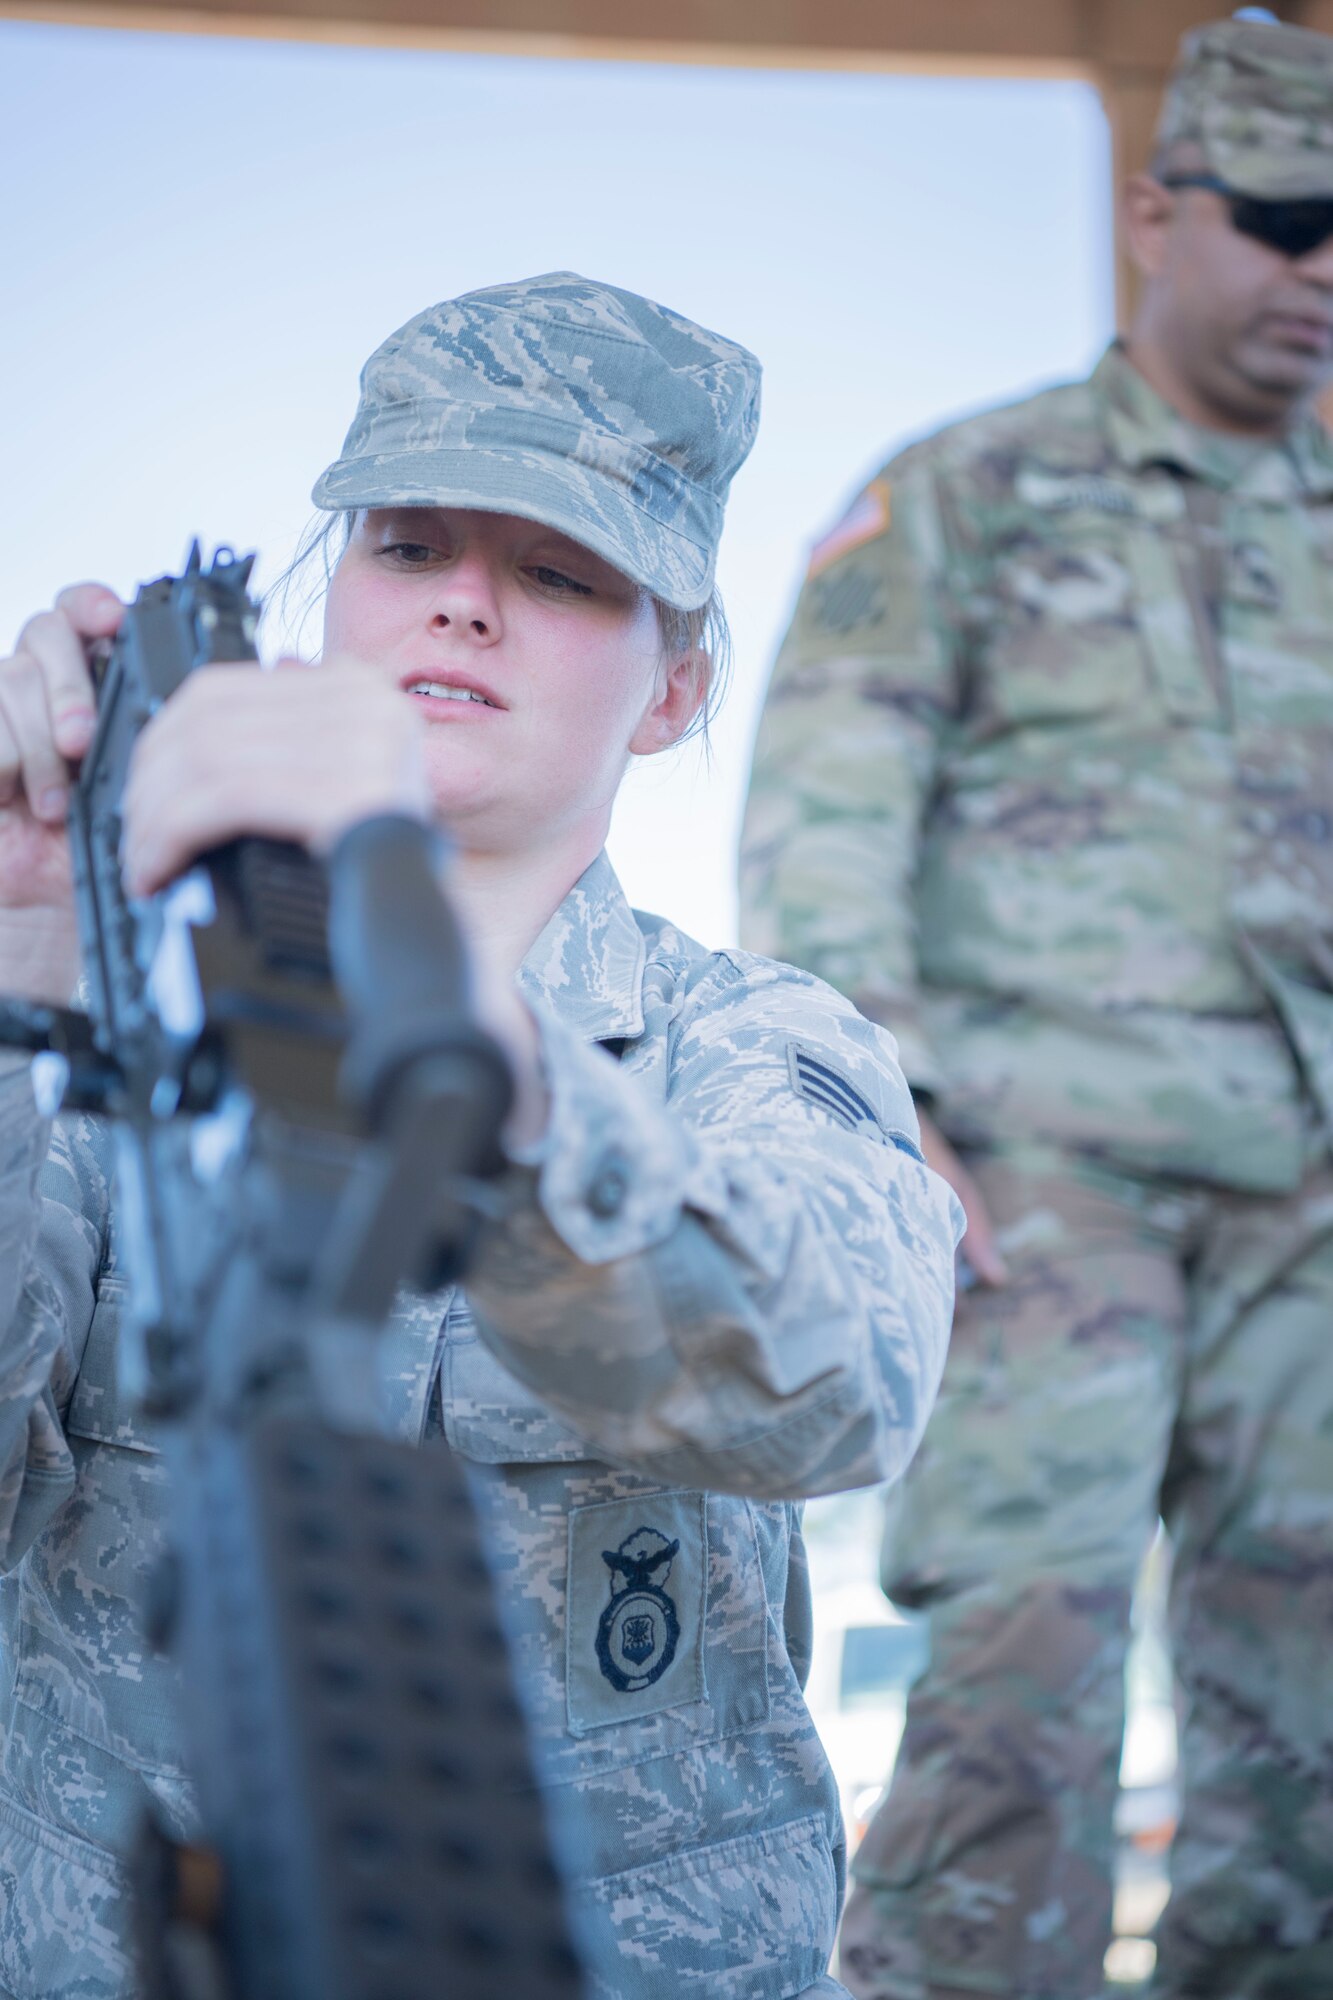 Senior Airman Sarah Lewis, a member of the 149th Security Forces Squadron, reassembles an M249 light machine gun during the Texas Military Department’s 2020 Best Warrior Competition March 7, 2020, at Camp Swift, Texas.